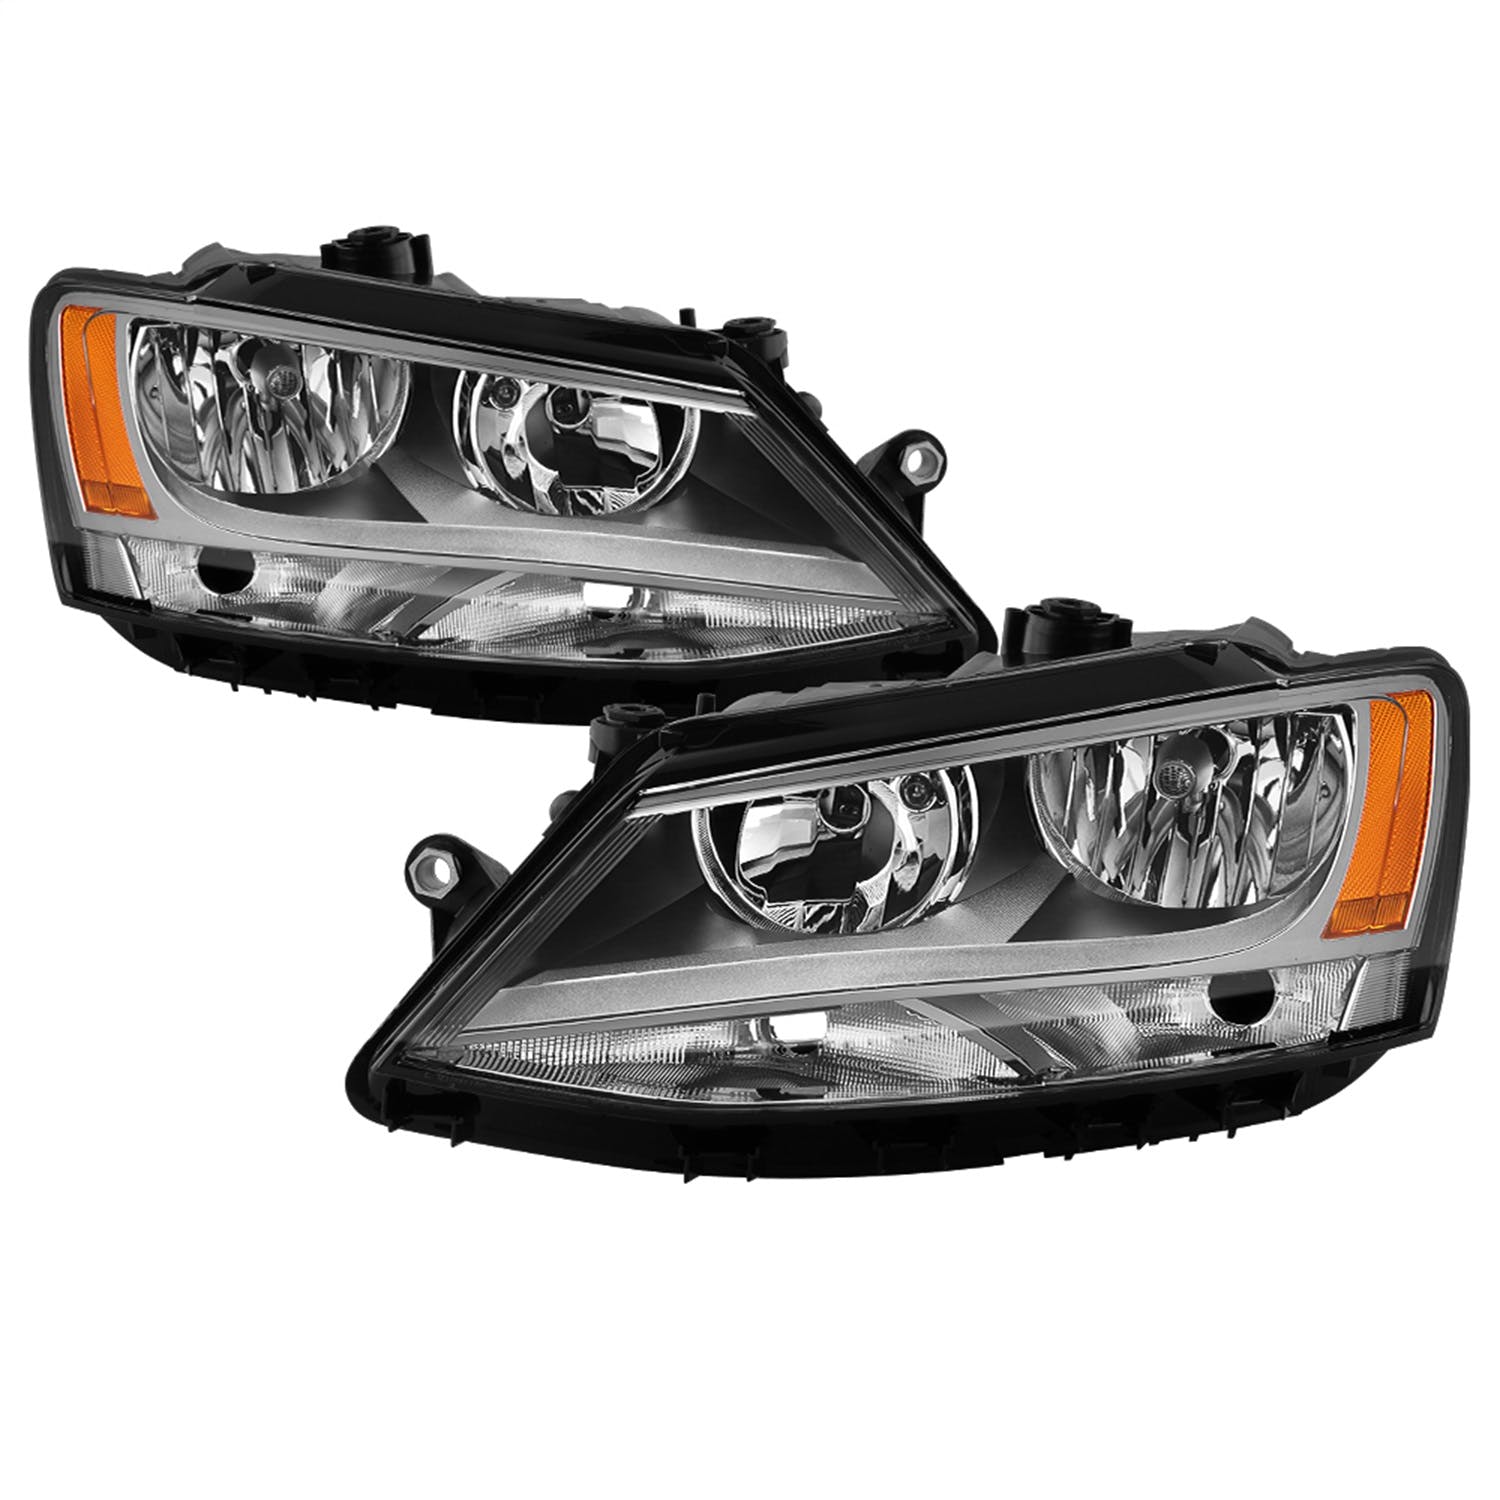 XTUNE POWER 9042348 Volkswagen Jetta 11 18 Halogen Model Only ( Not Compatible With Xenon HID Model ) Only fits sedan models OEM Style Headlights Chrome